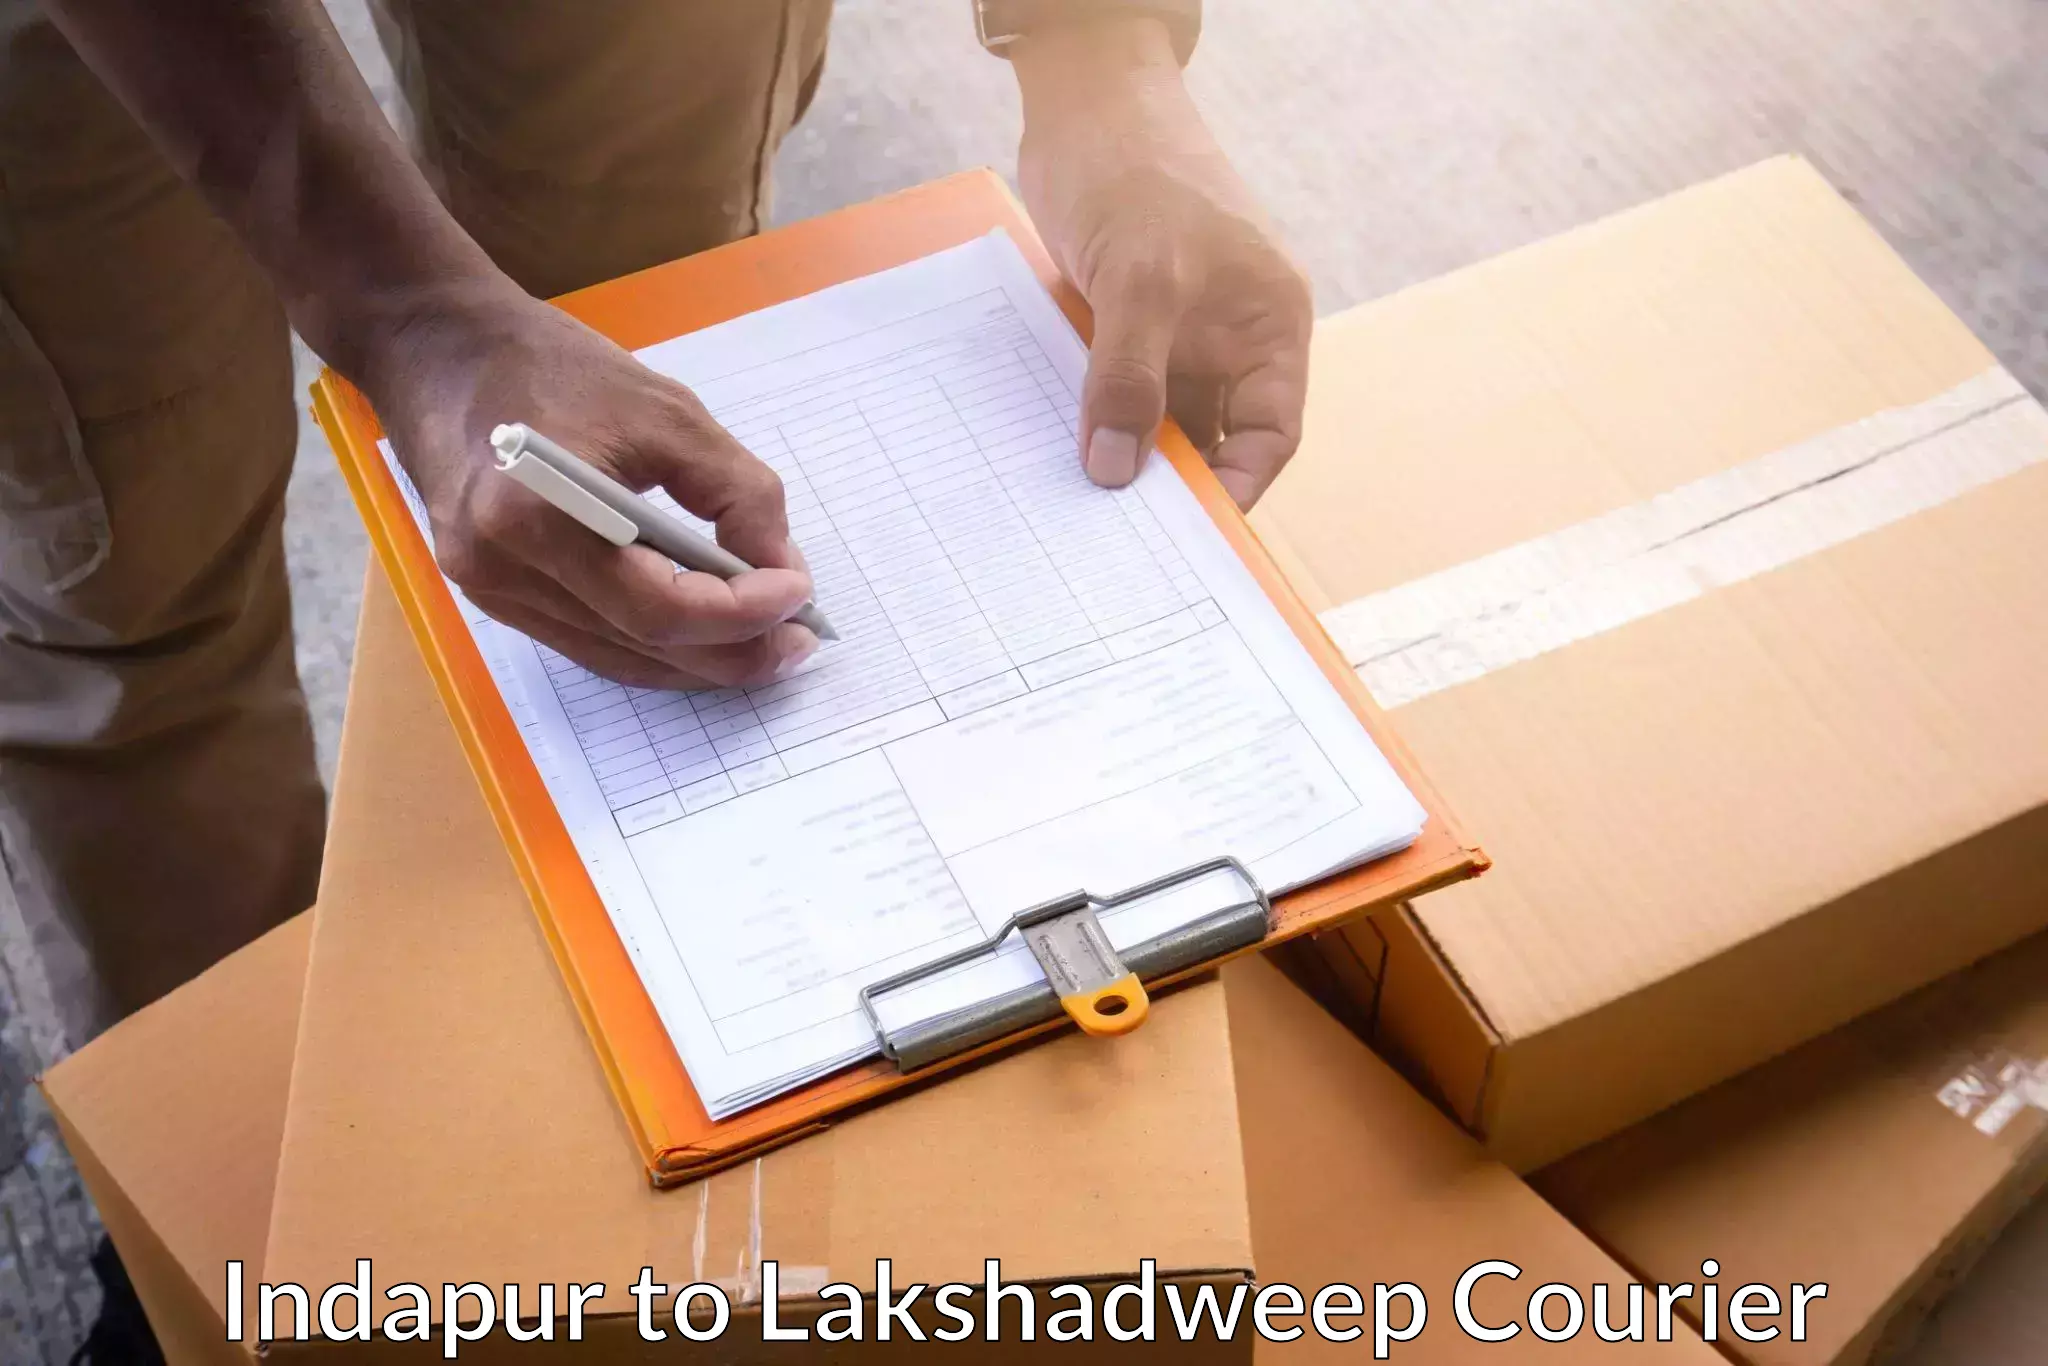 Full-service courier options in Indapur to Lakshadweep